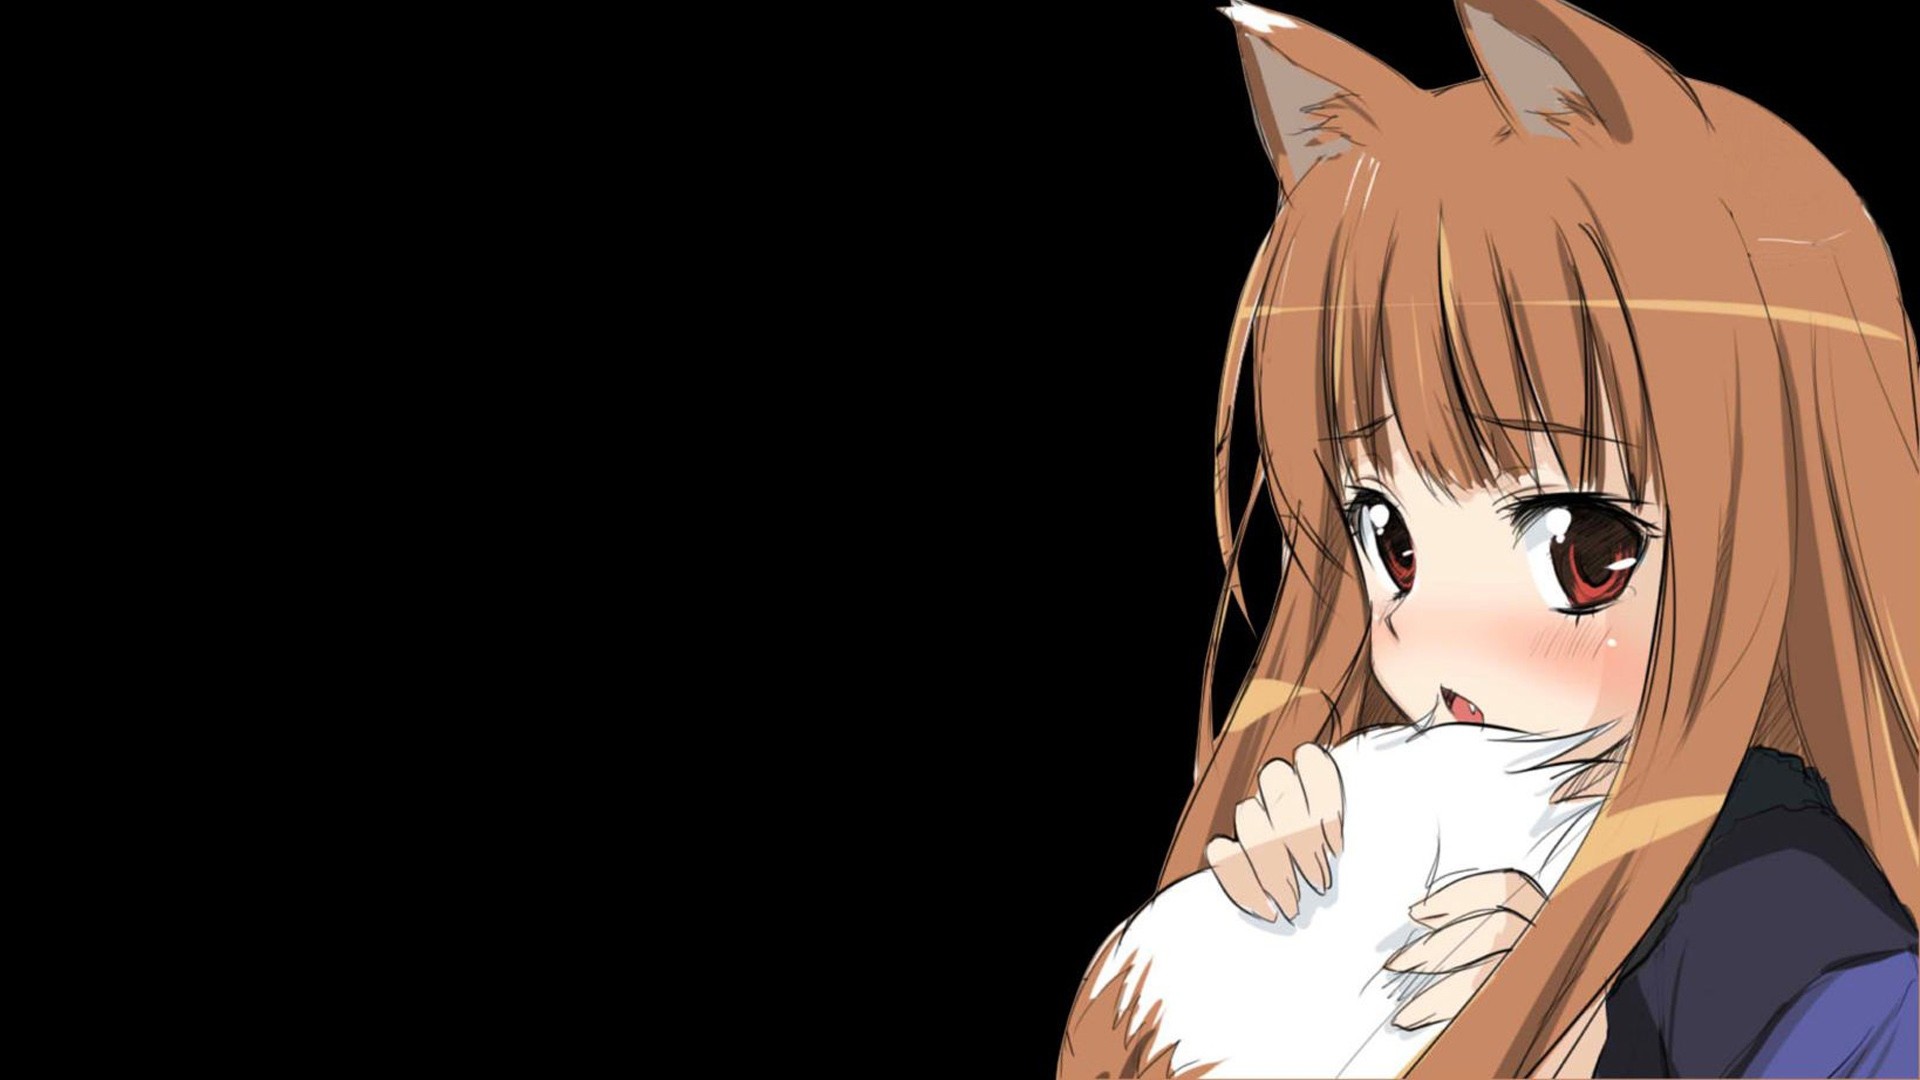 Preview wallpaper anime, spice wolf, girl, ears, tail, fear 1920×1080